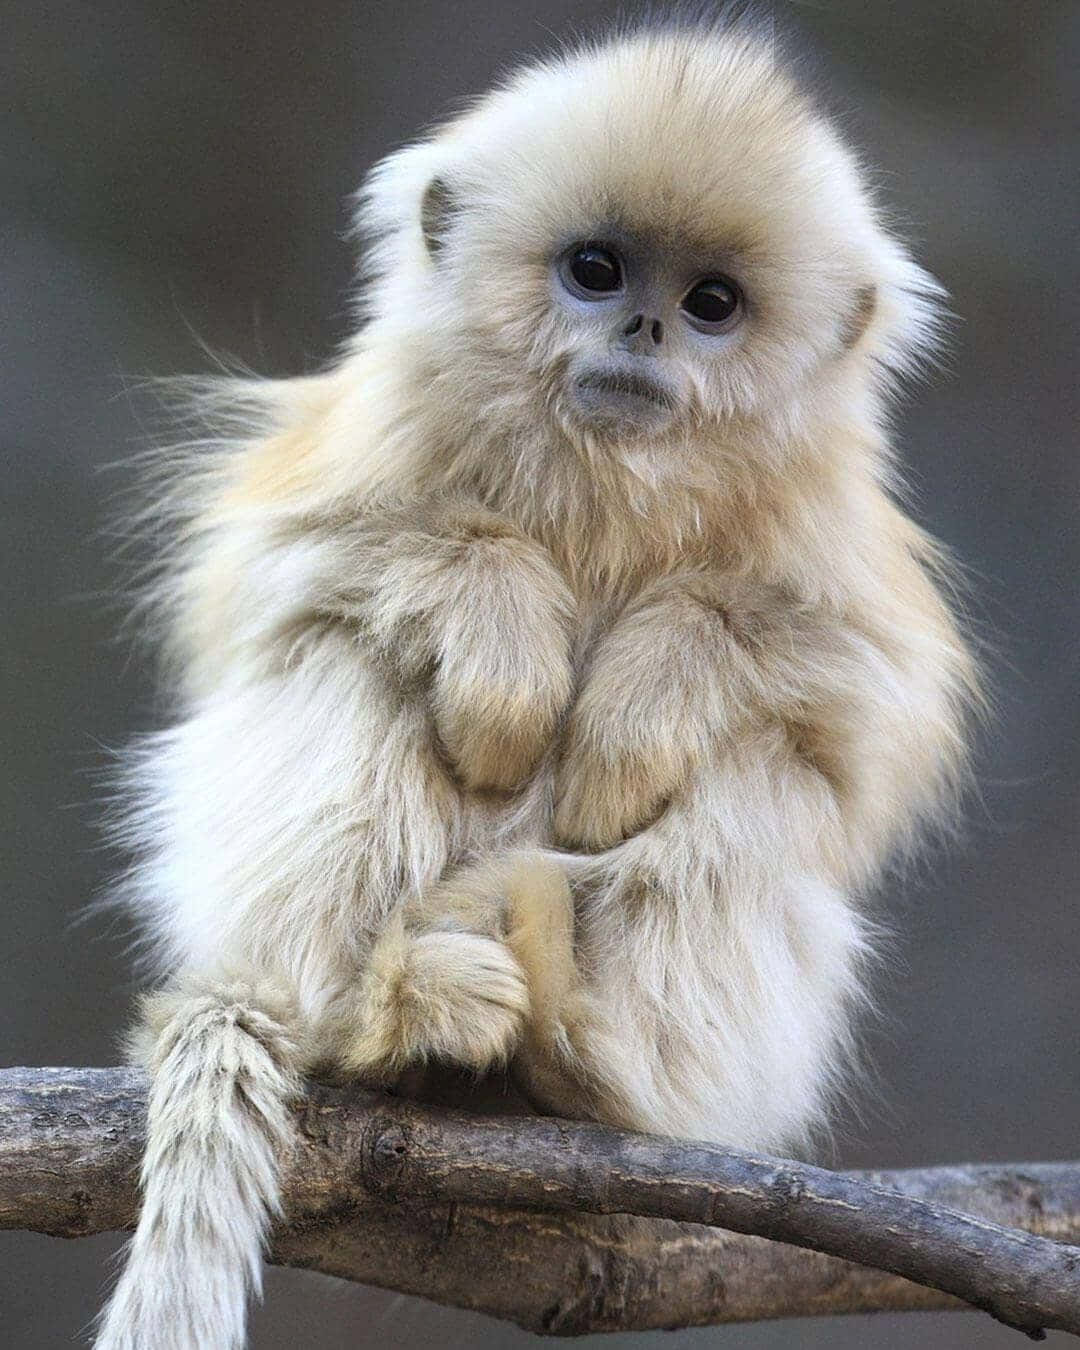 Look at this Adorable Monkey